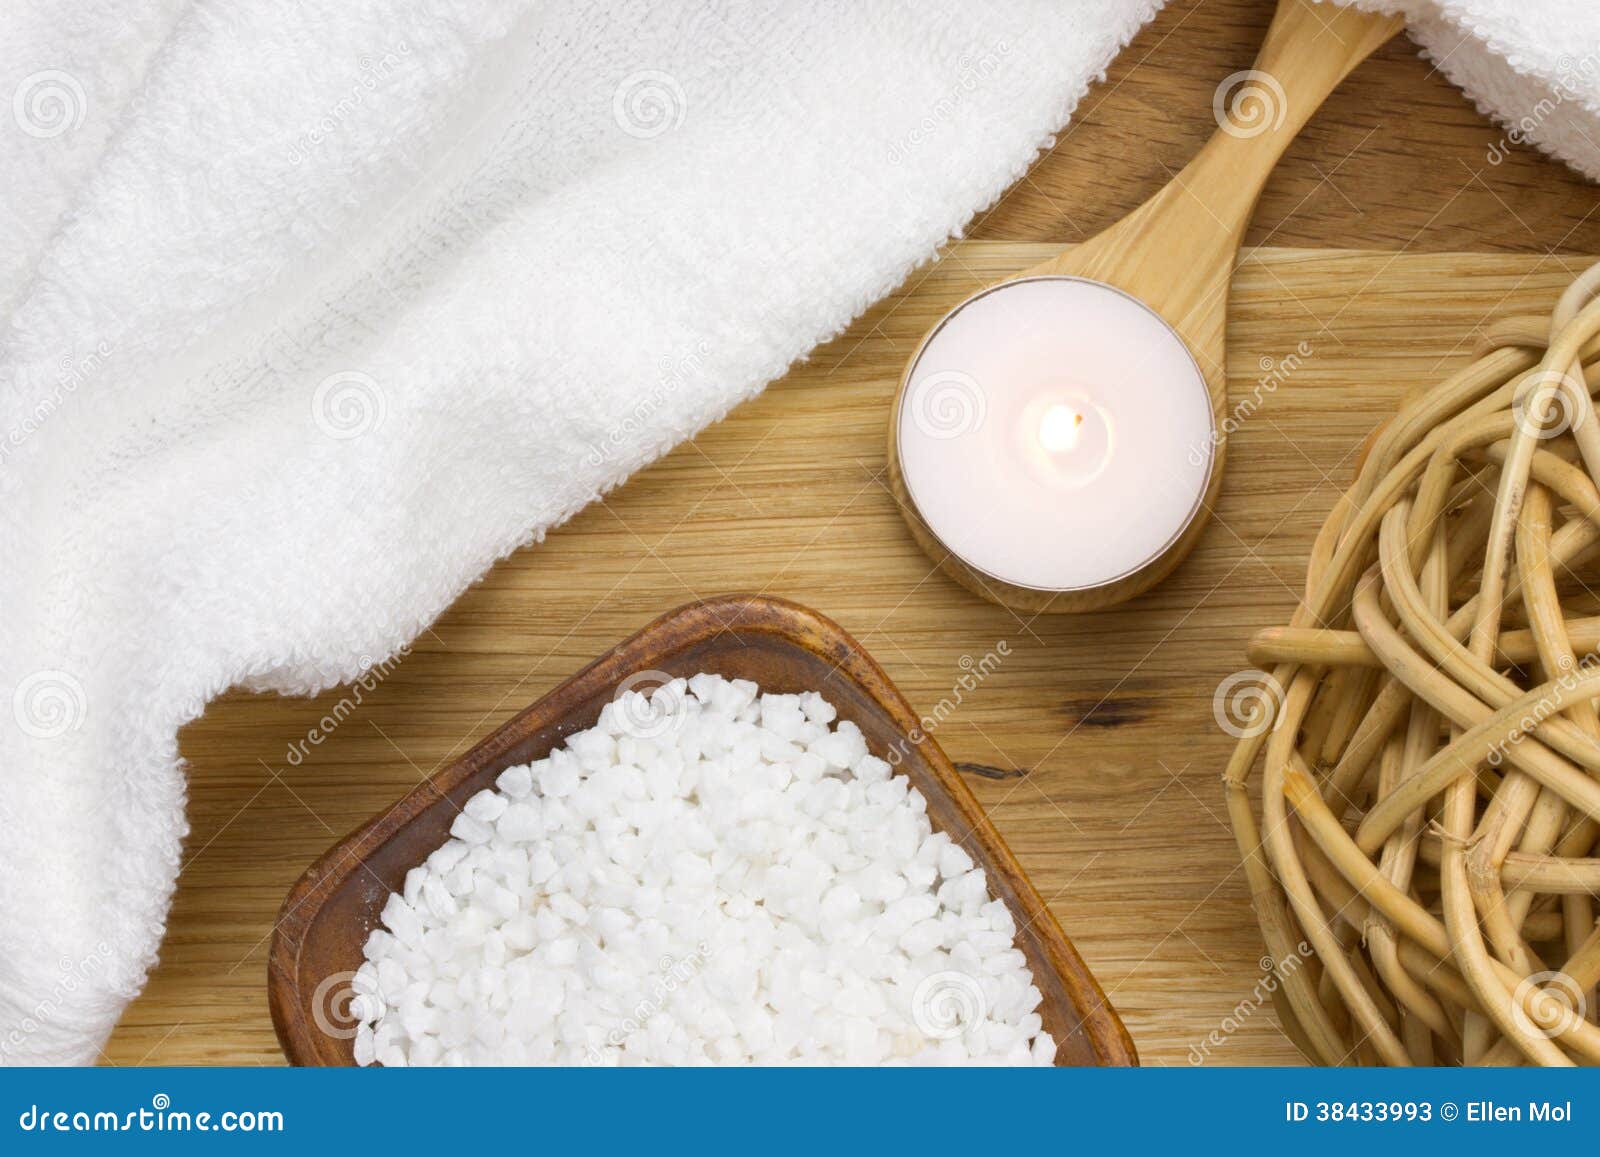 wellness candle on a wooden spoon with towel and bath salt